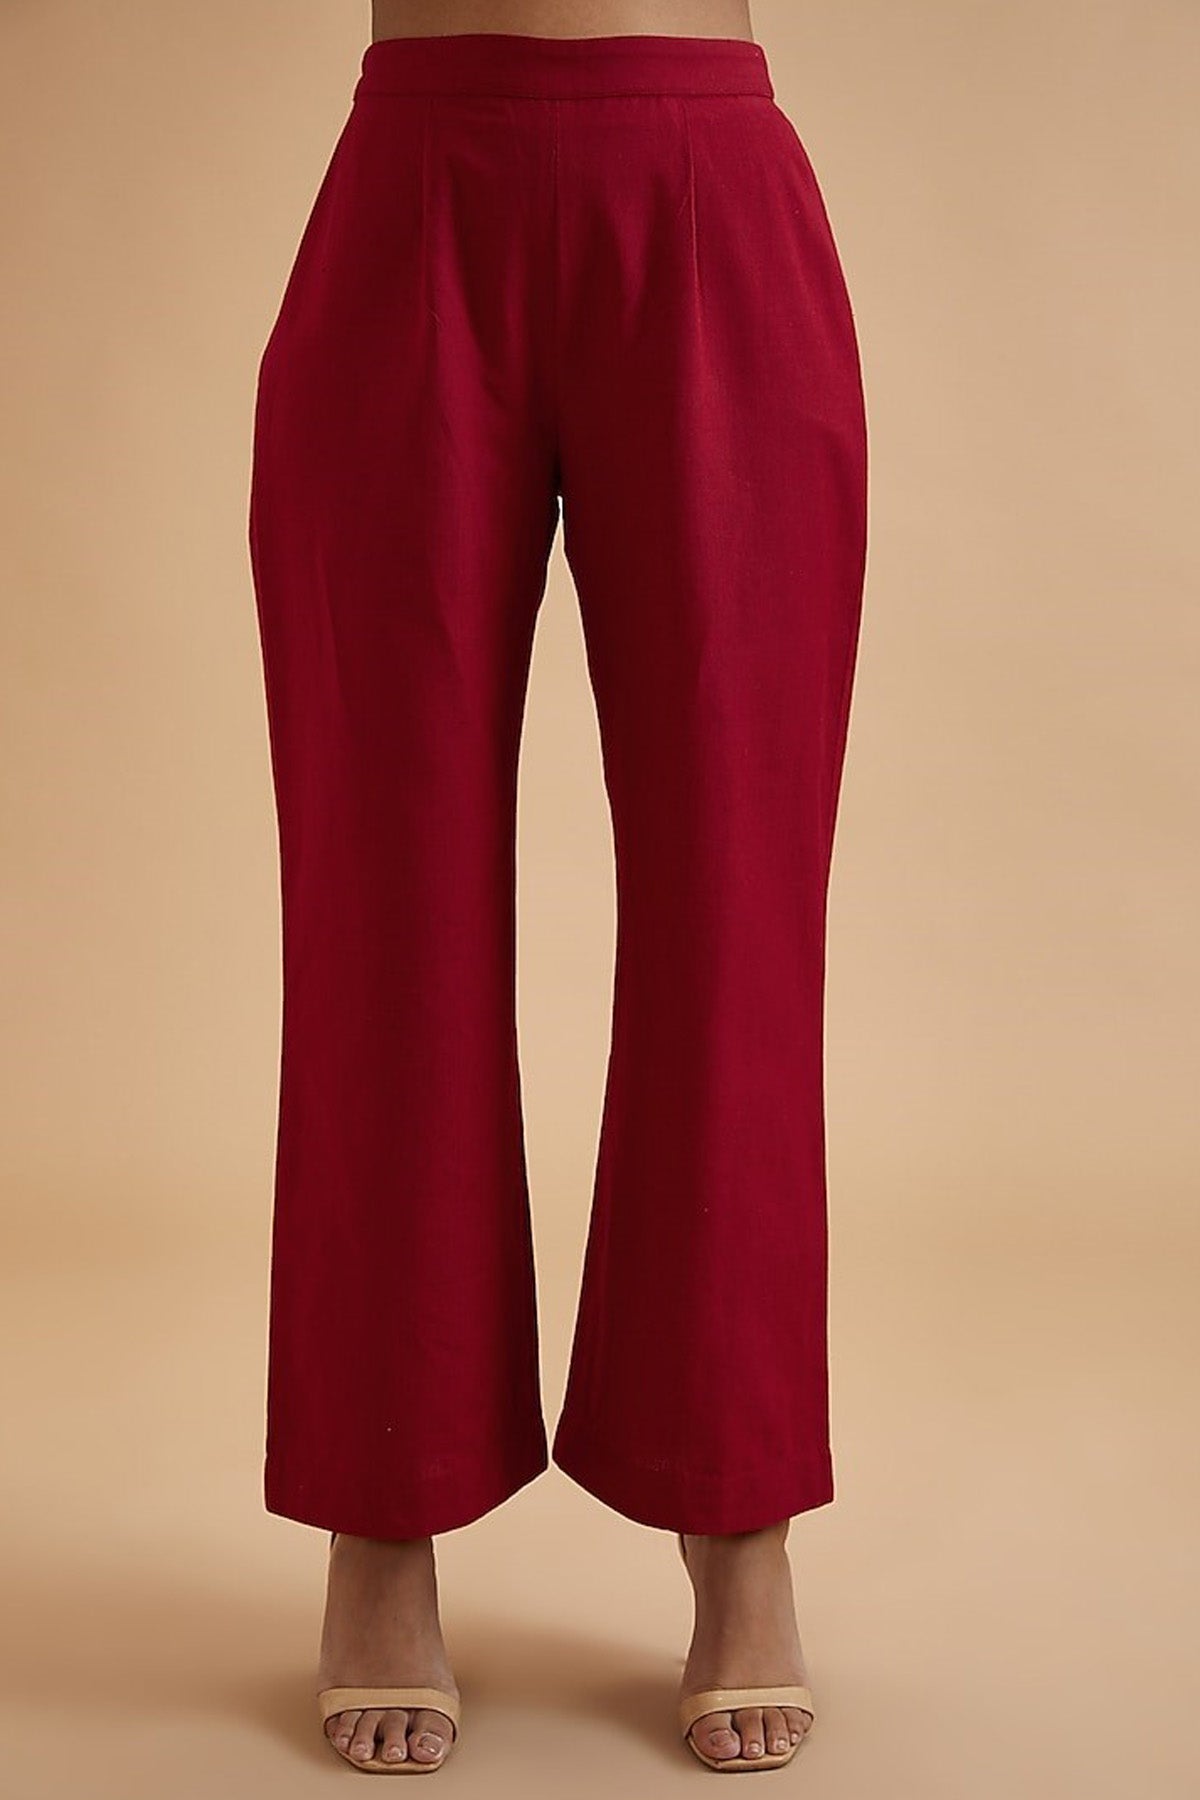 Scarlet Red Cotton Straight Pants